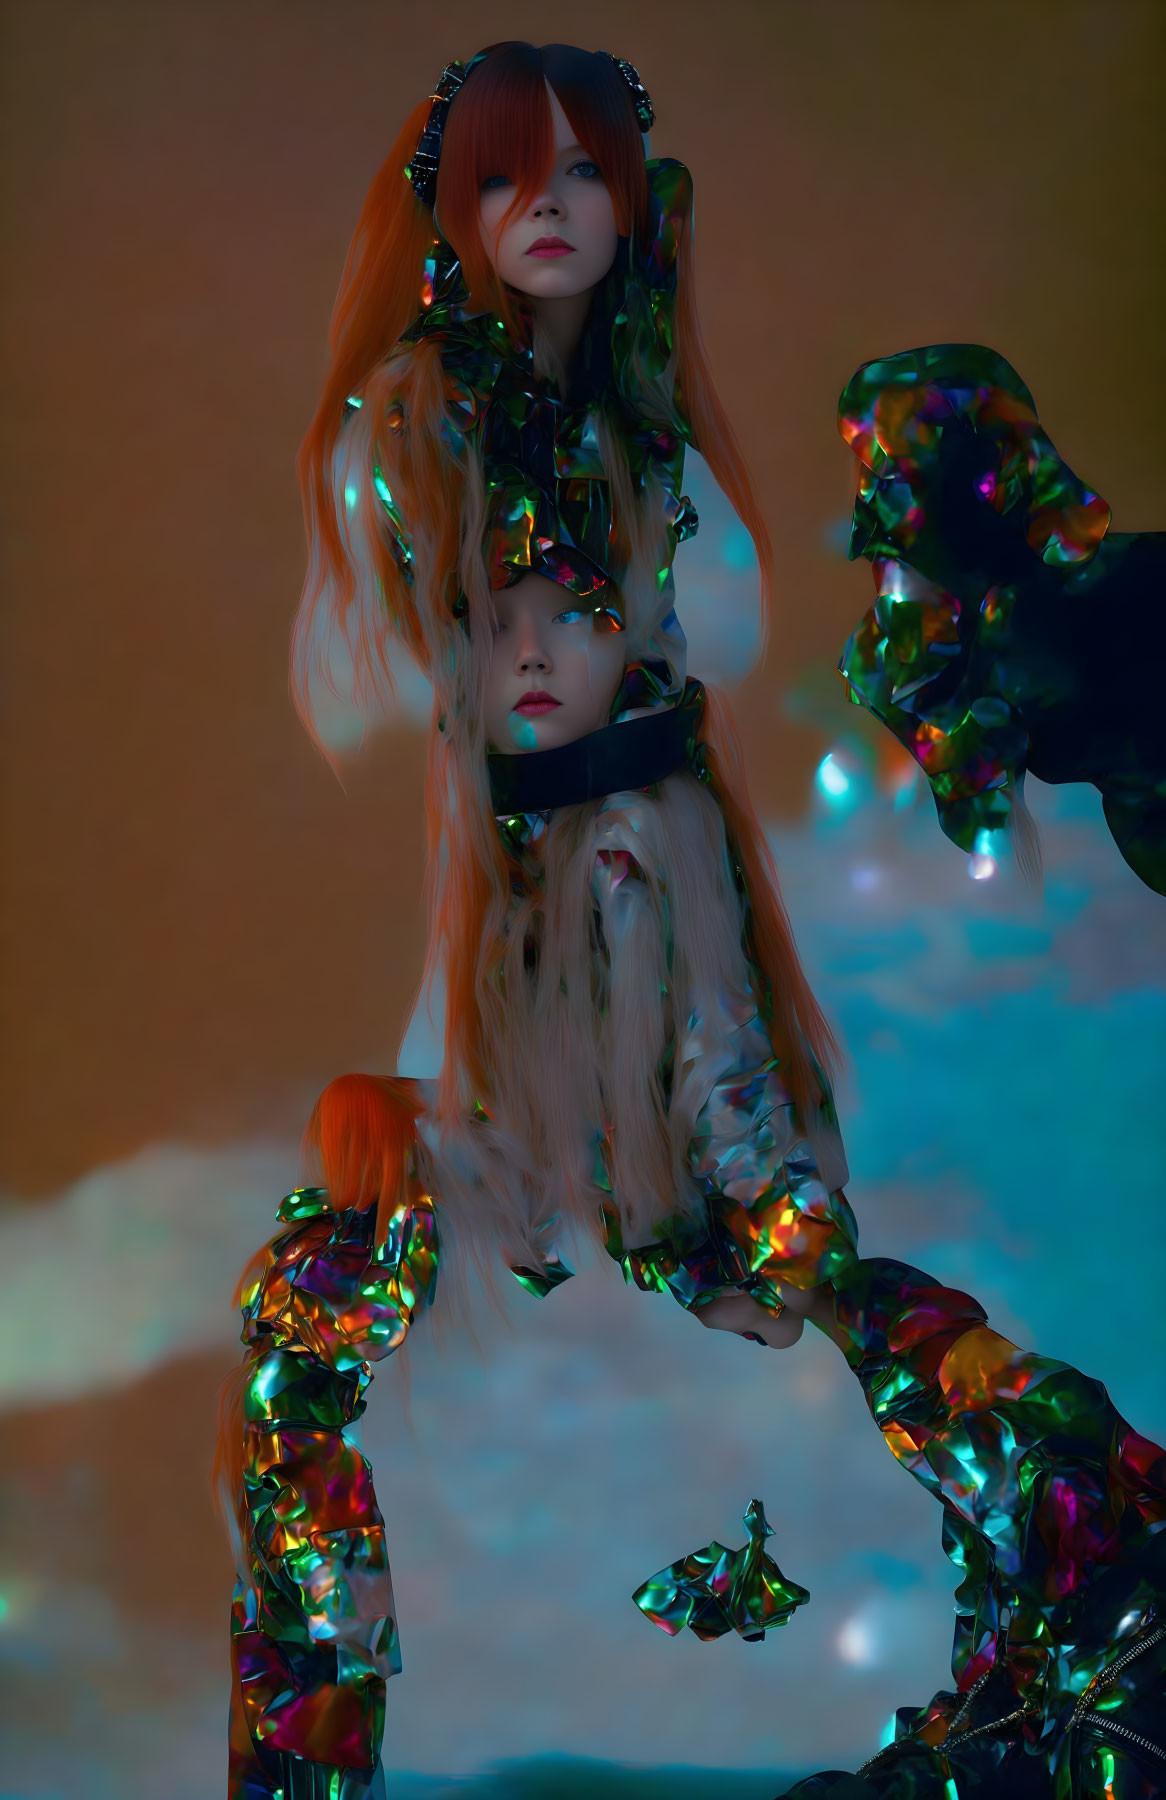 Orange-haired person in iridescent futuristic outfit on gradient background